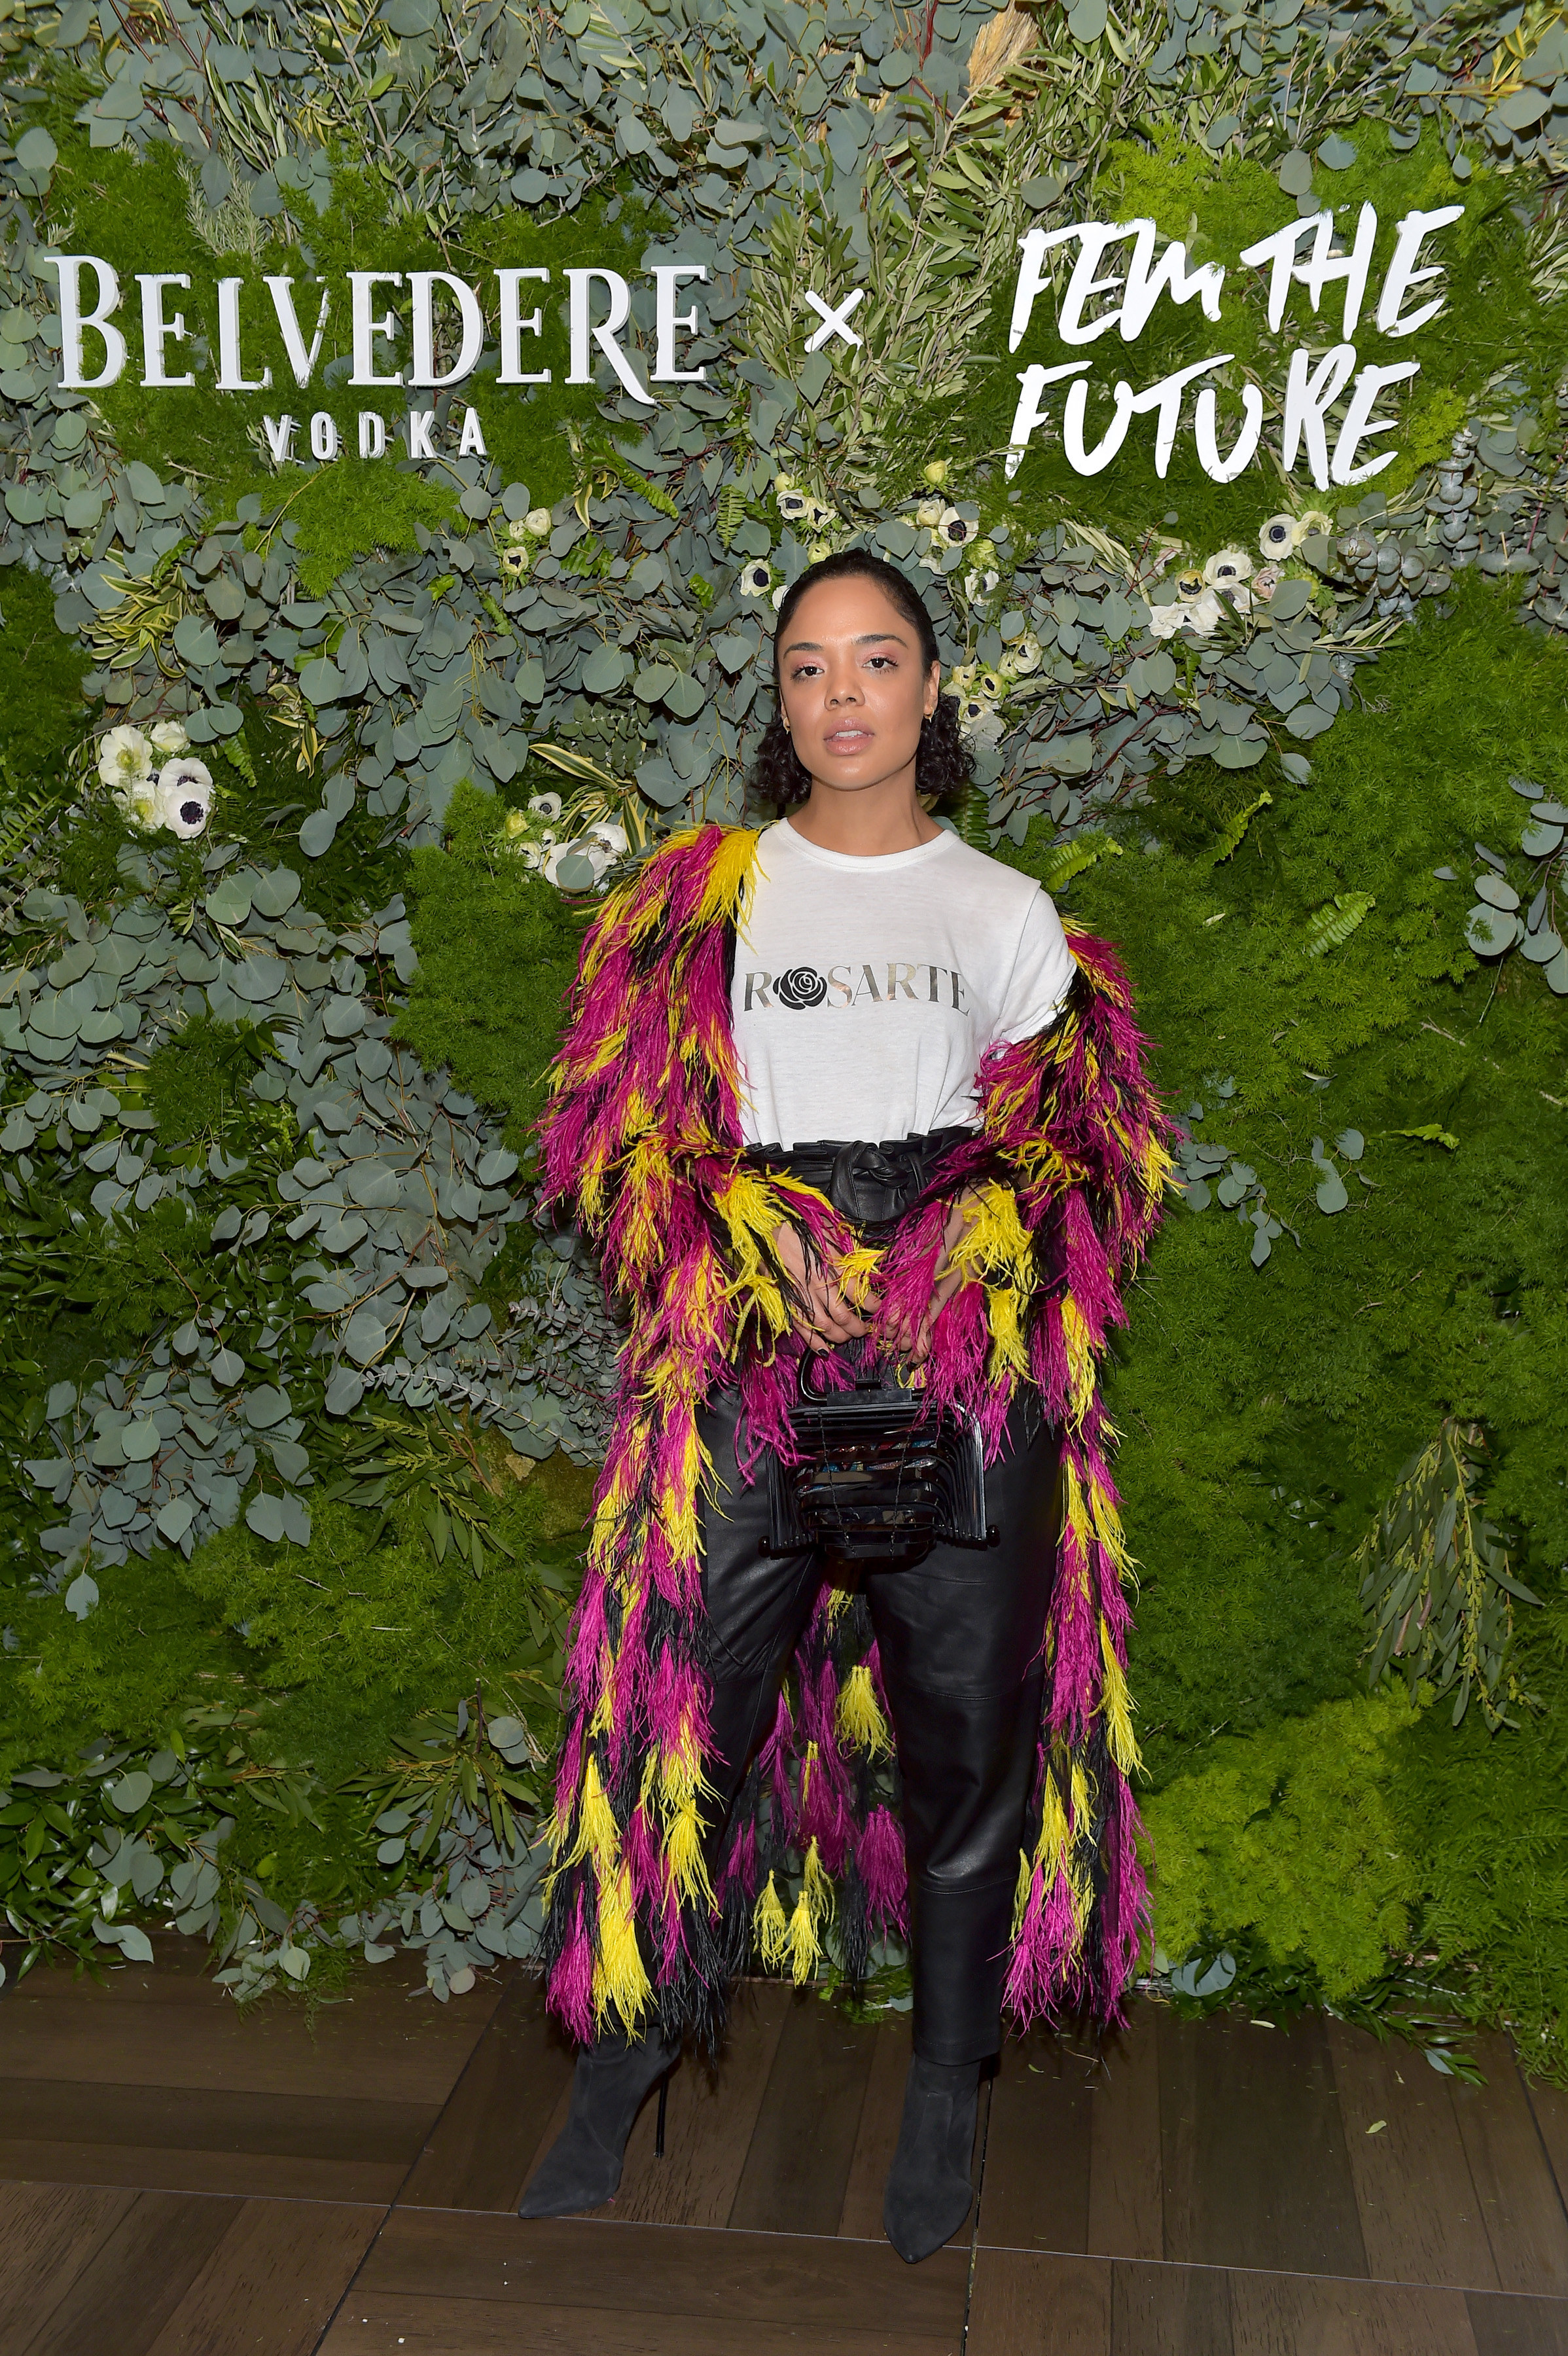 Actor Tessa Thompson attends Belvedere Vodka kick-off &quot;A Beautiful Future&quot; Campaign. She wears black leather trousers, black suede boots, a white t-shirt that says &quot;Rosarte&quot; on it, and a long feathered jacket in black, yellow and fuchsia.